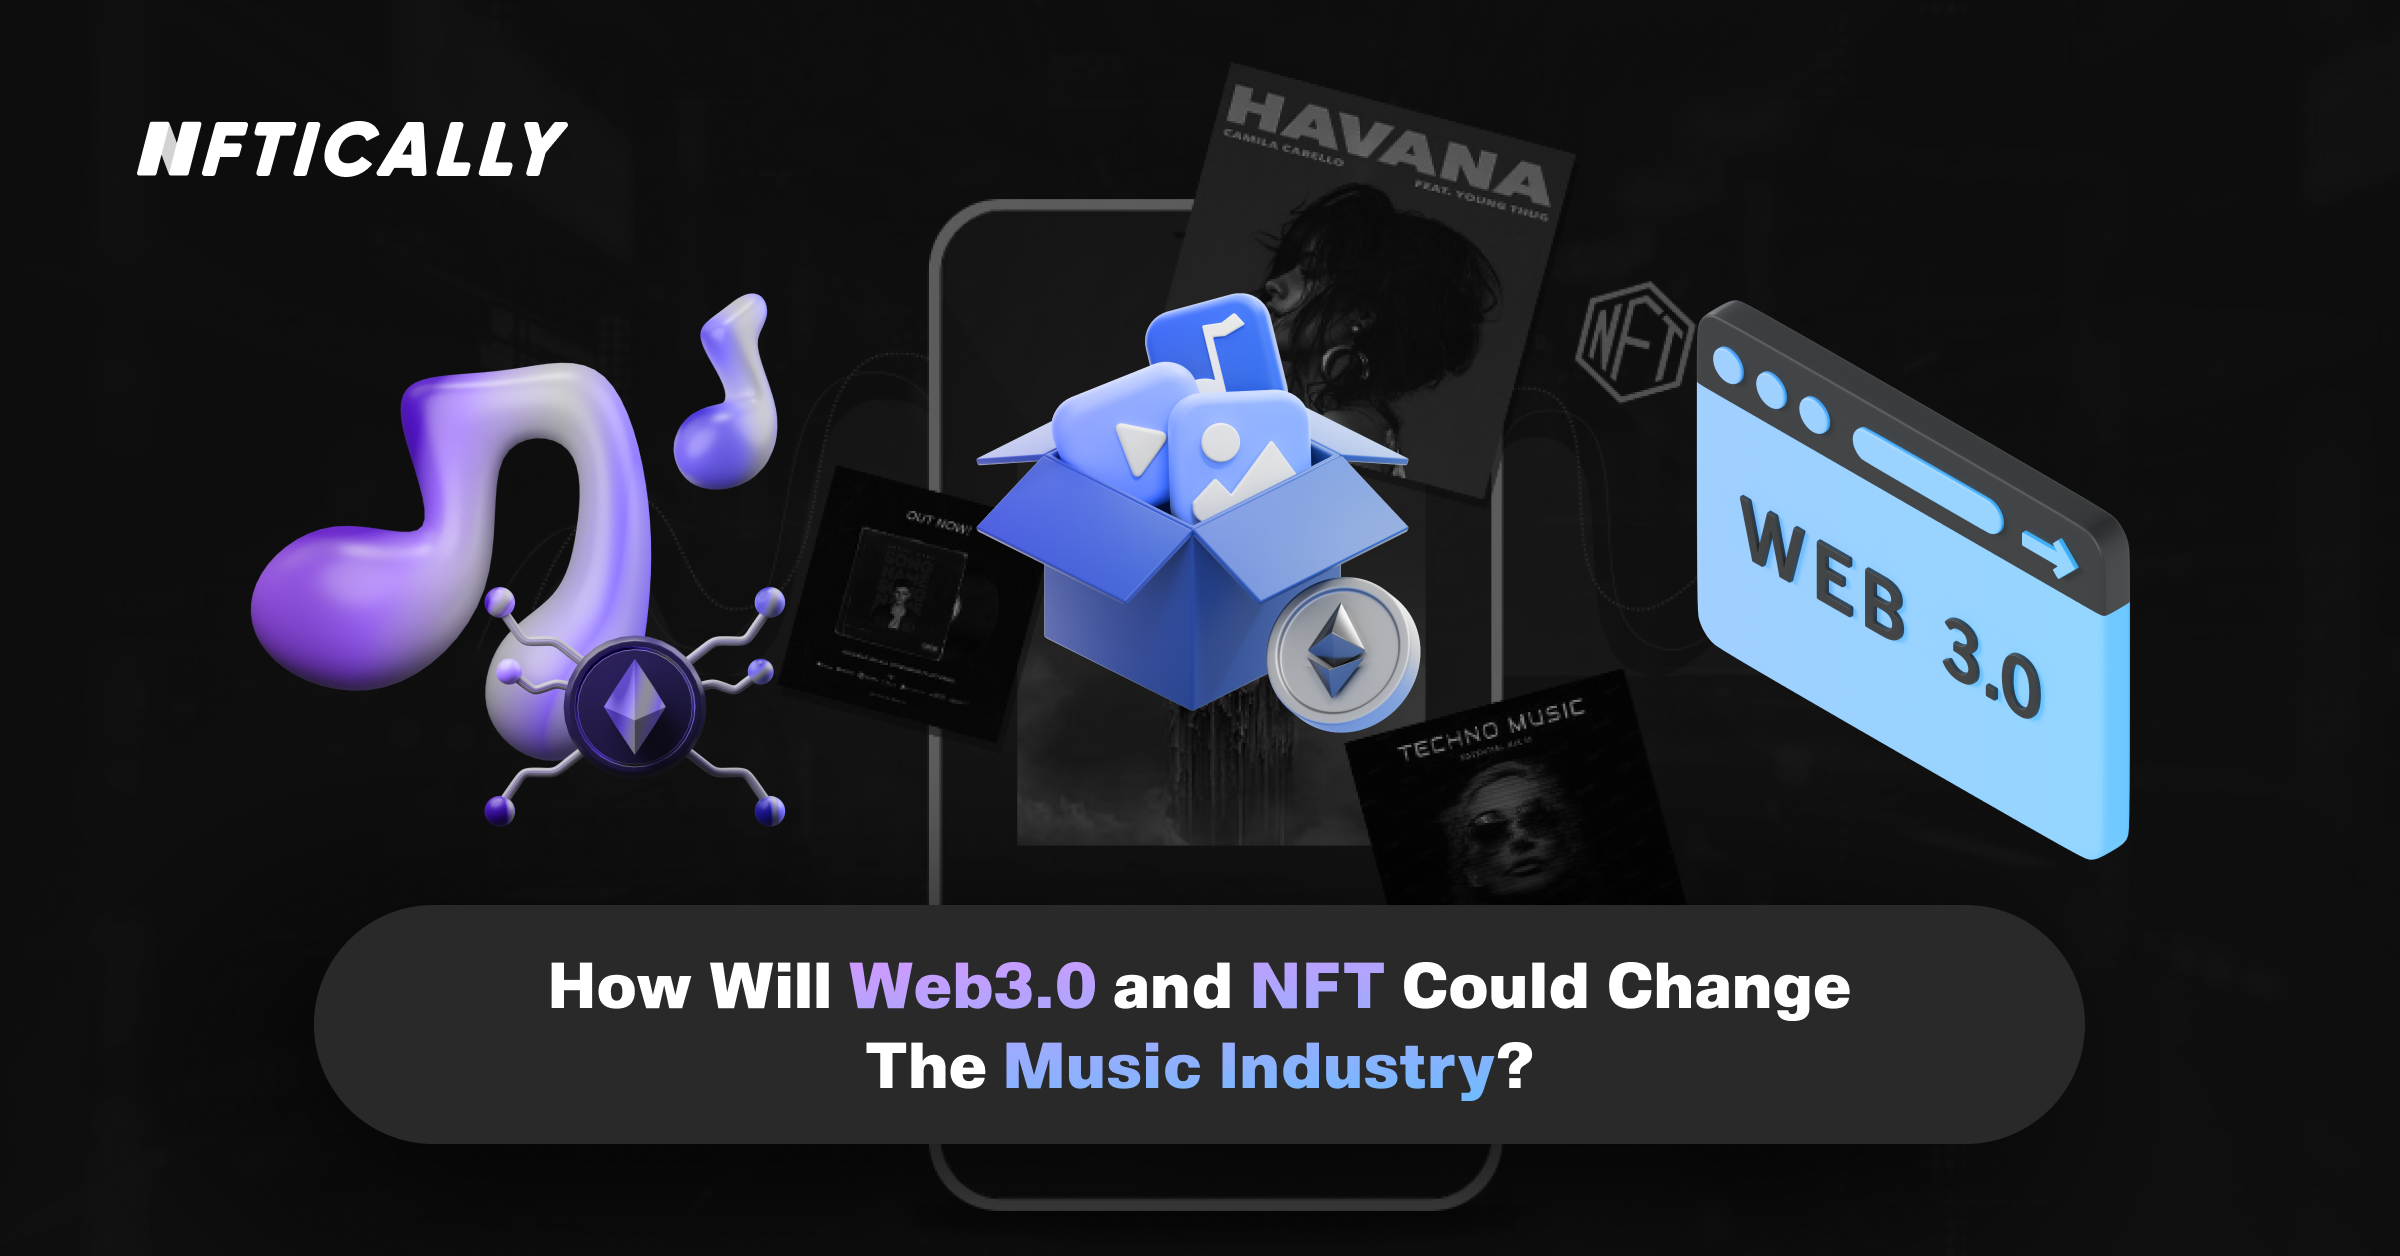 How Will Web 3.0 and NFT Could Change The Music Industry?